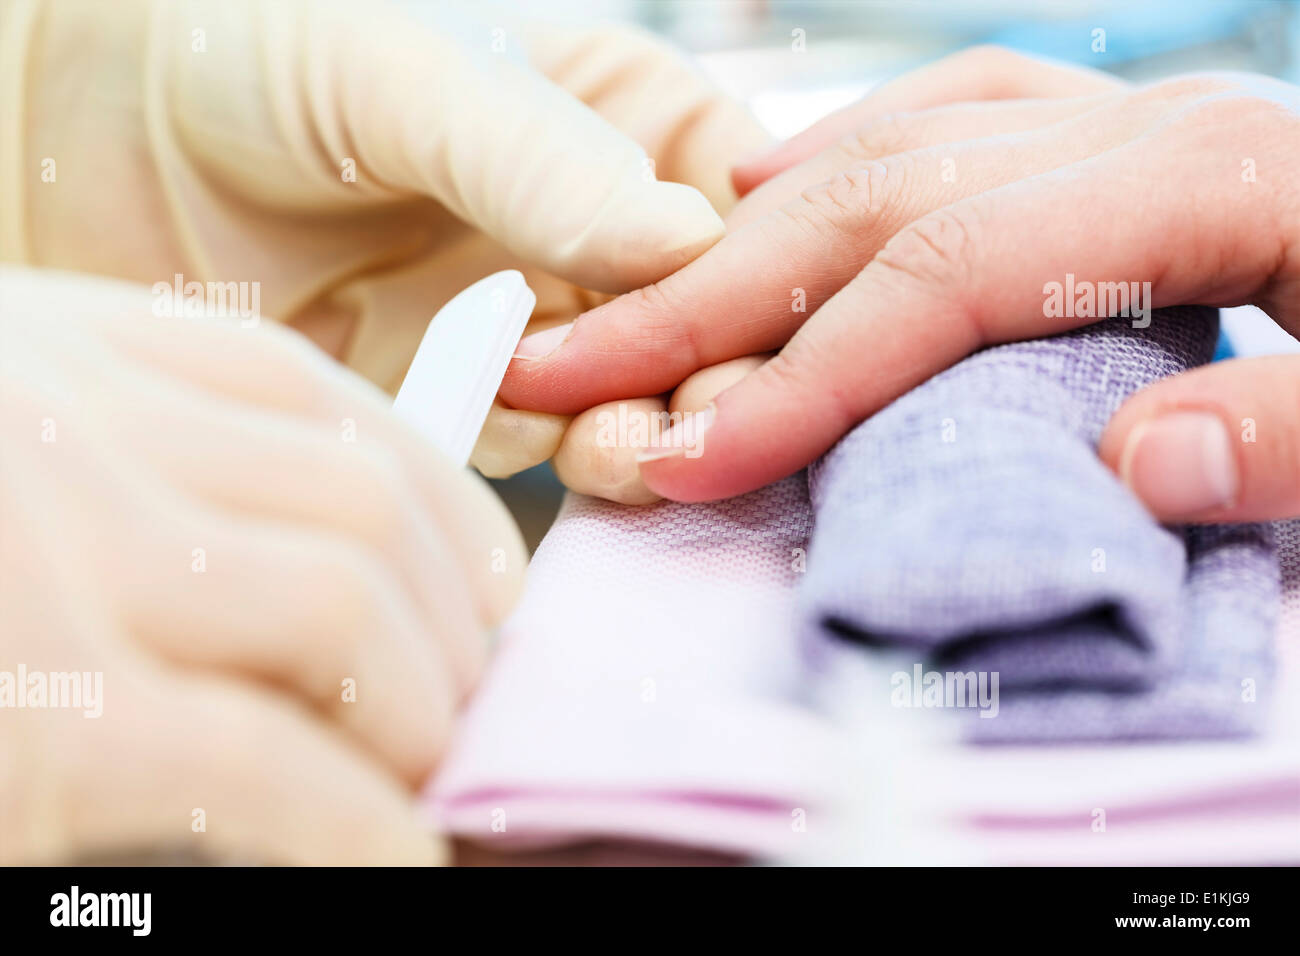 Person having a manicure close up. Stock Photo